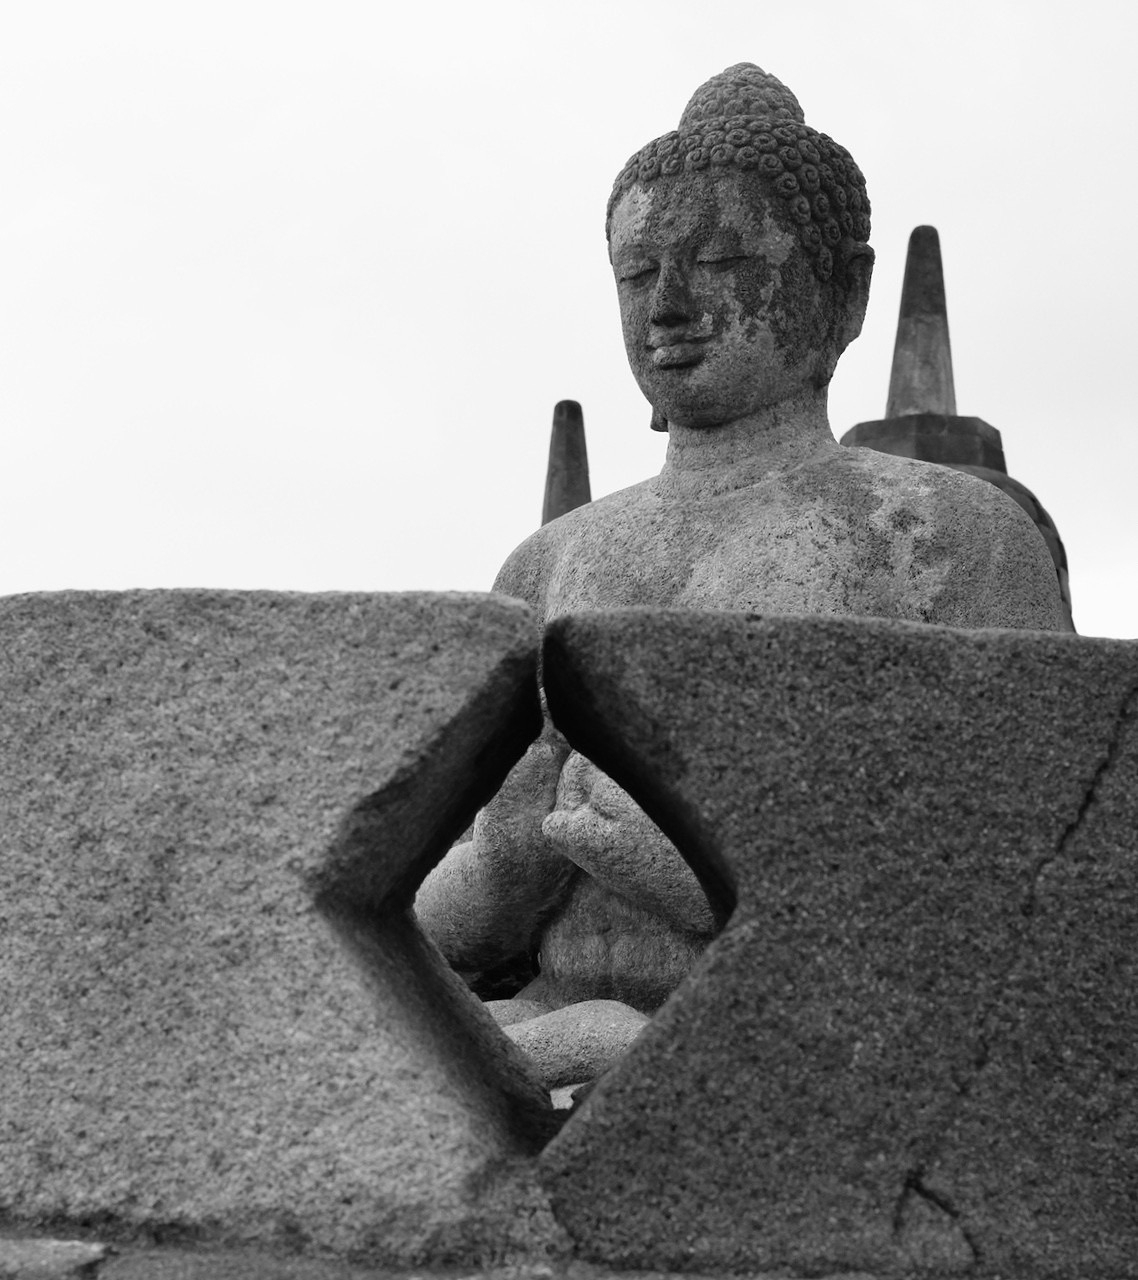 A monochrome photo of a Buddha statue inside a partially open stupa (perforated stone enclosure in an inverted bell shape) at Borobudur Temple, Indonesia. His eyes are closed, and through a perforation in the stupa, you can see the position of his hands in a particular mudra.